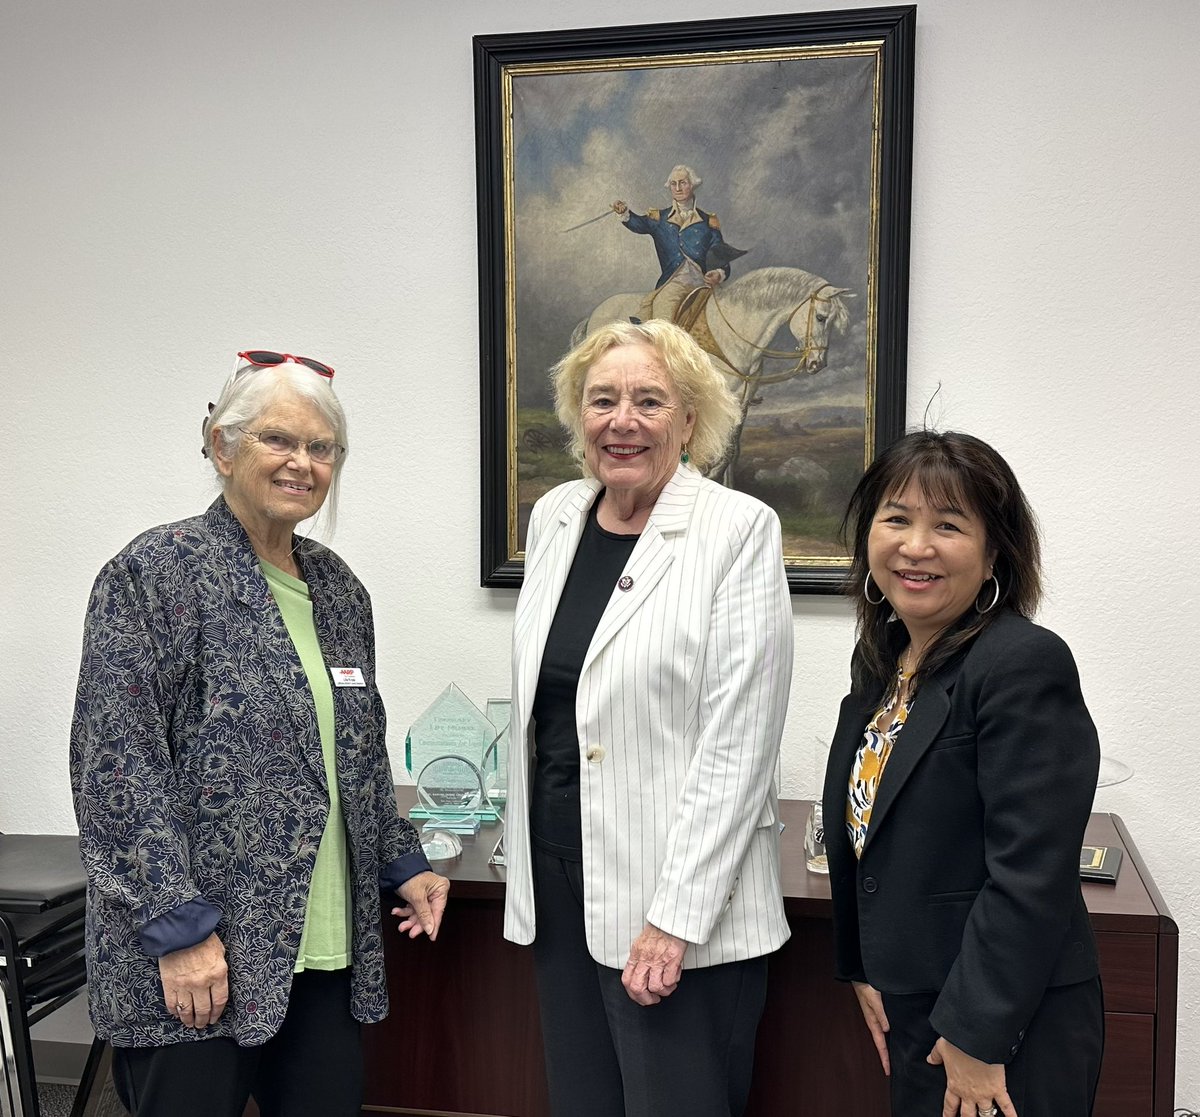 4.4 million family caregivers in CA give their all to care for loved ones. A rewarding and sometimes difficult role. Thank you @RepZoeLofgren for meeting with us to discuss the challenges that family caregivers face. @AARPCA #familycaregiving